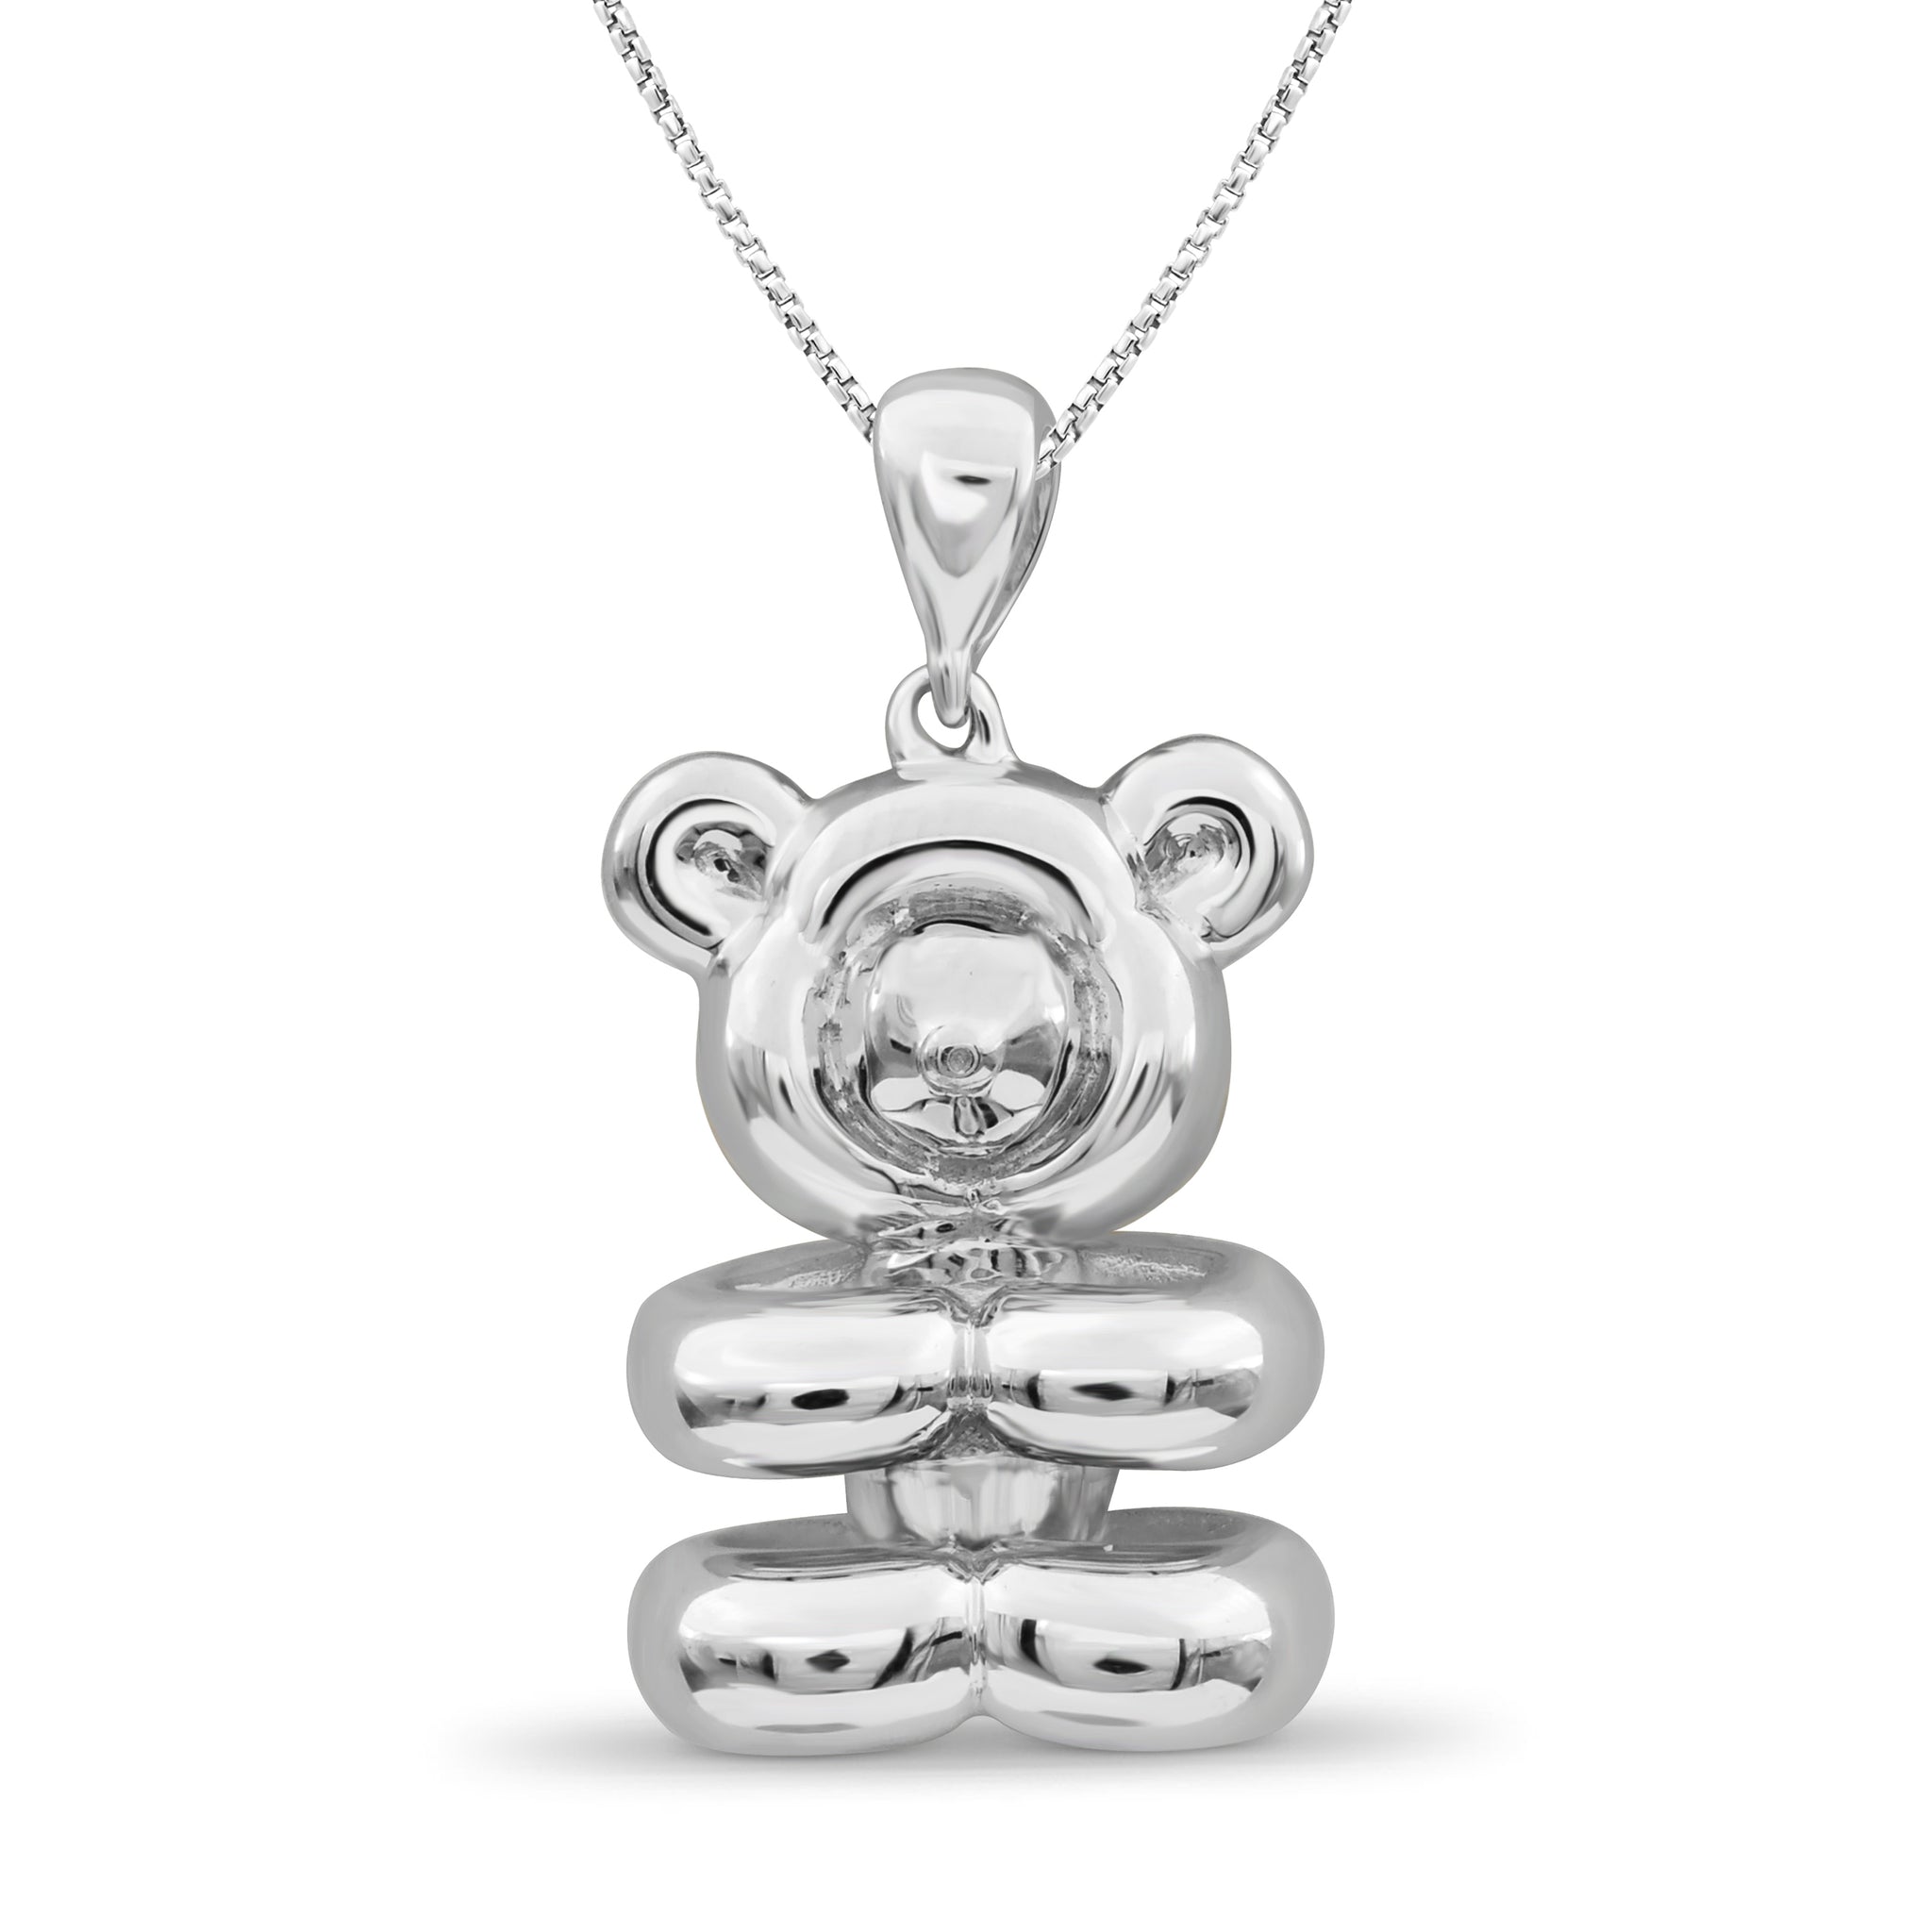 JewelonFire Sterling Silver Teddy Metal Pendant - Assorted Color